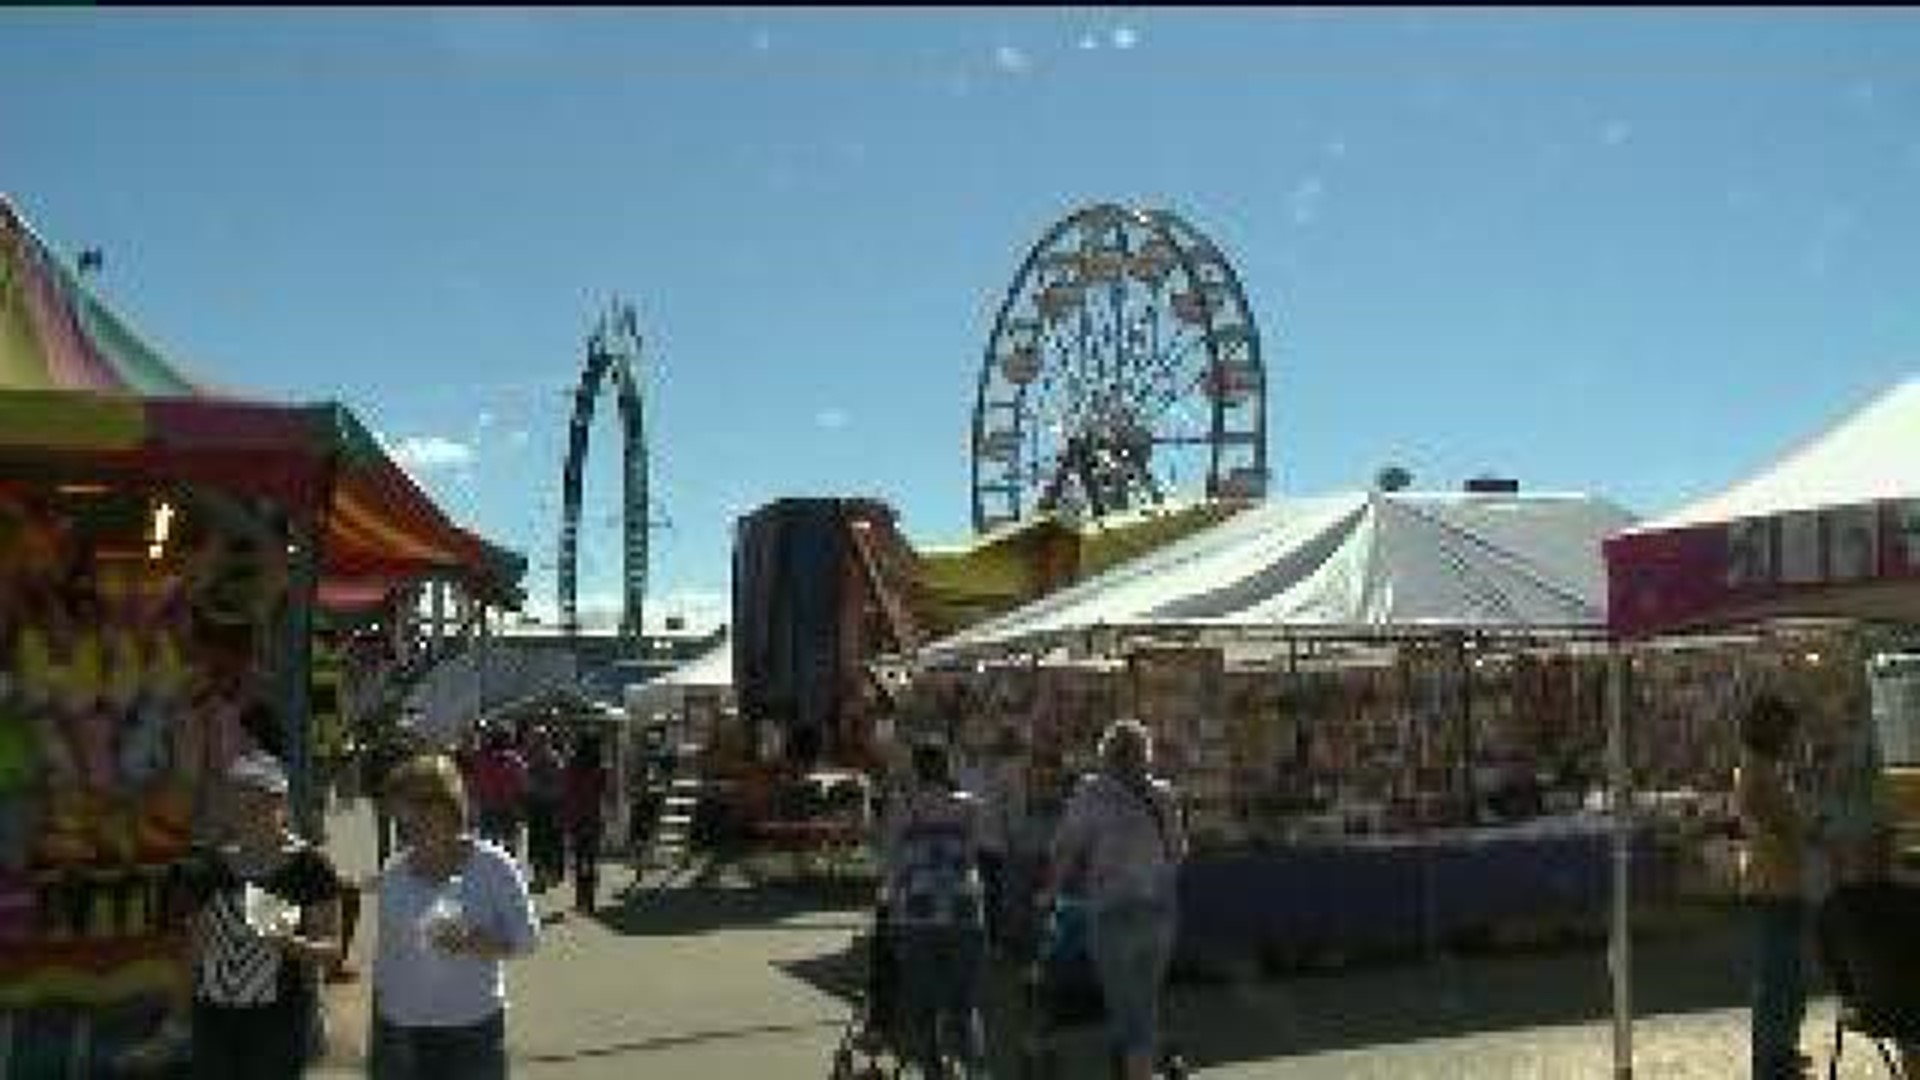 Rides and Games At The Bloomsburg Fair